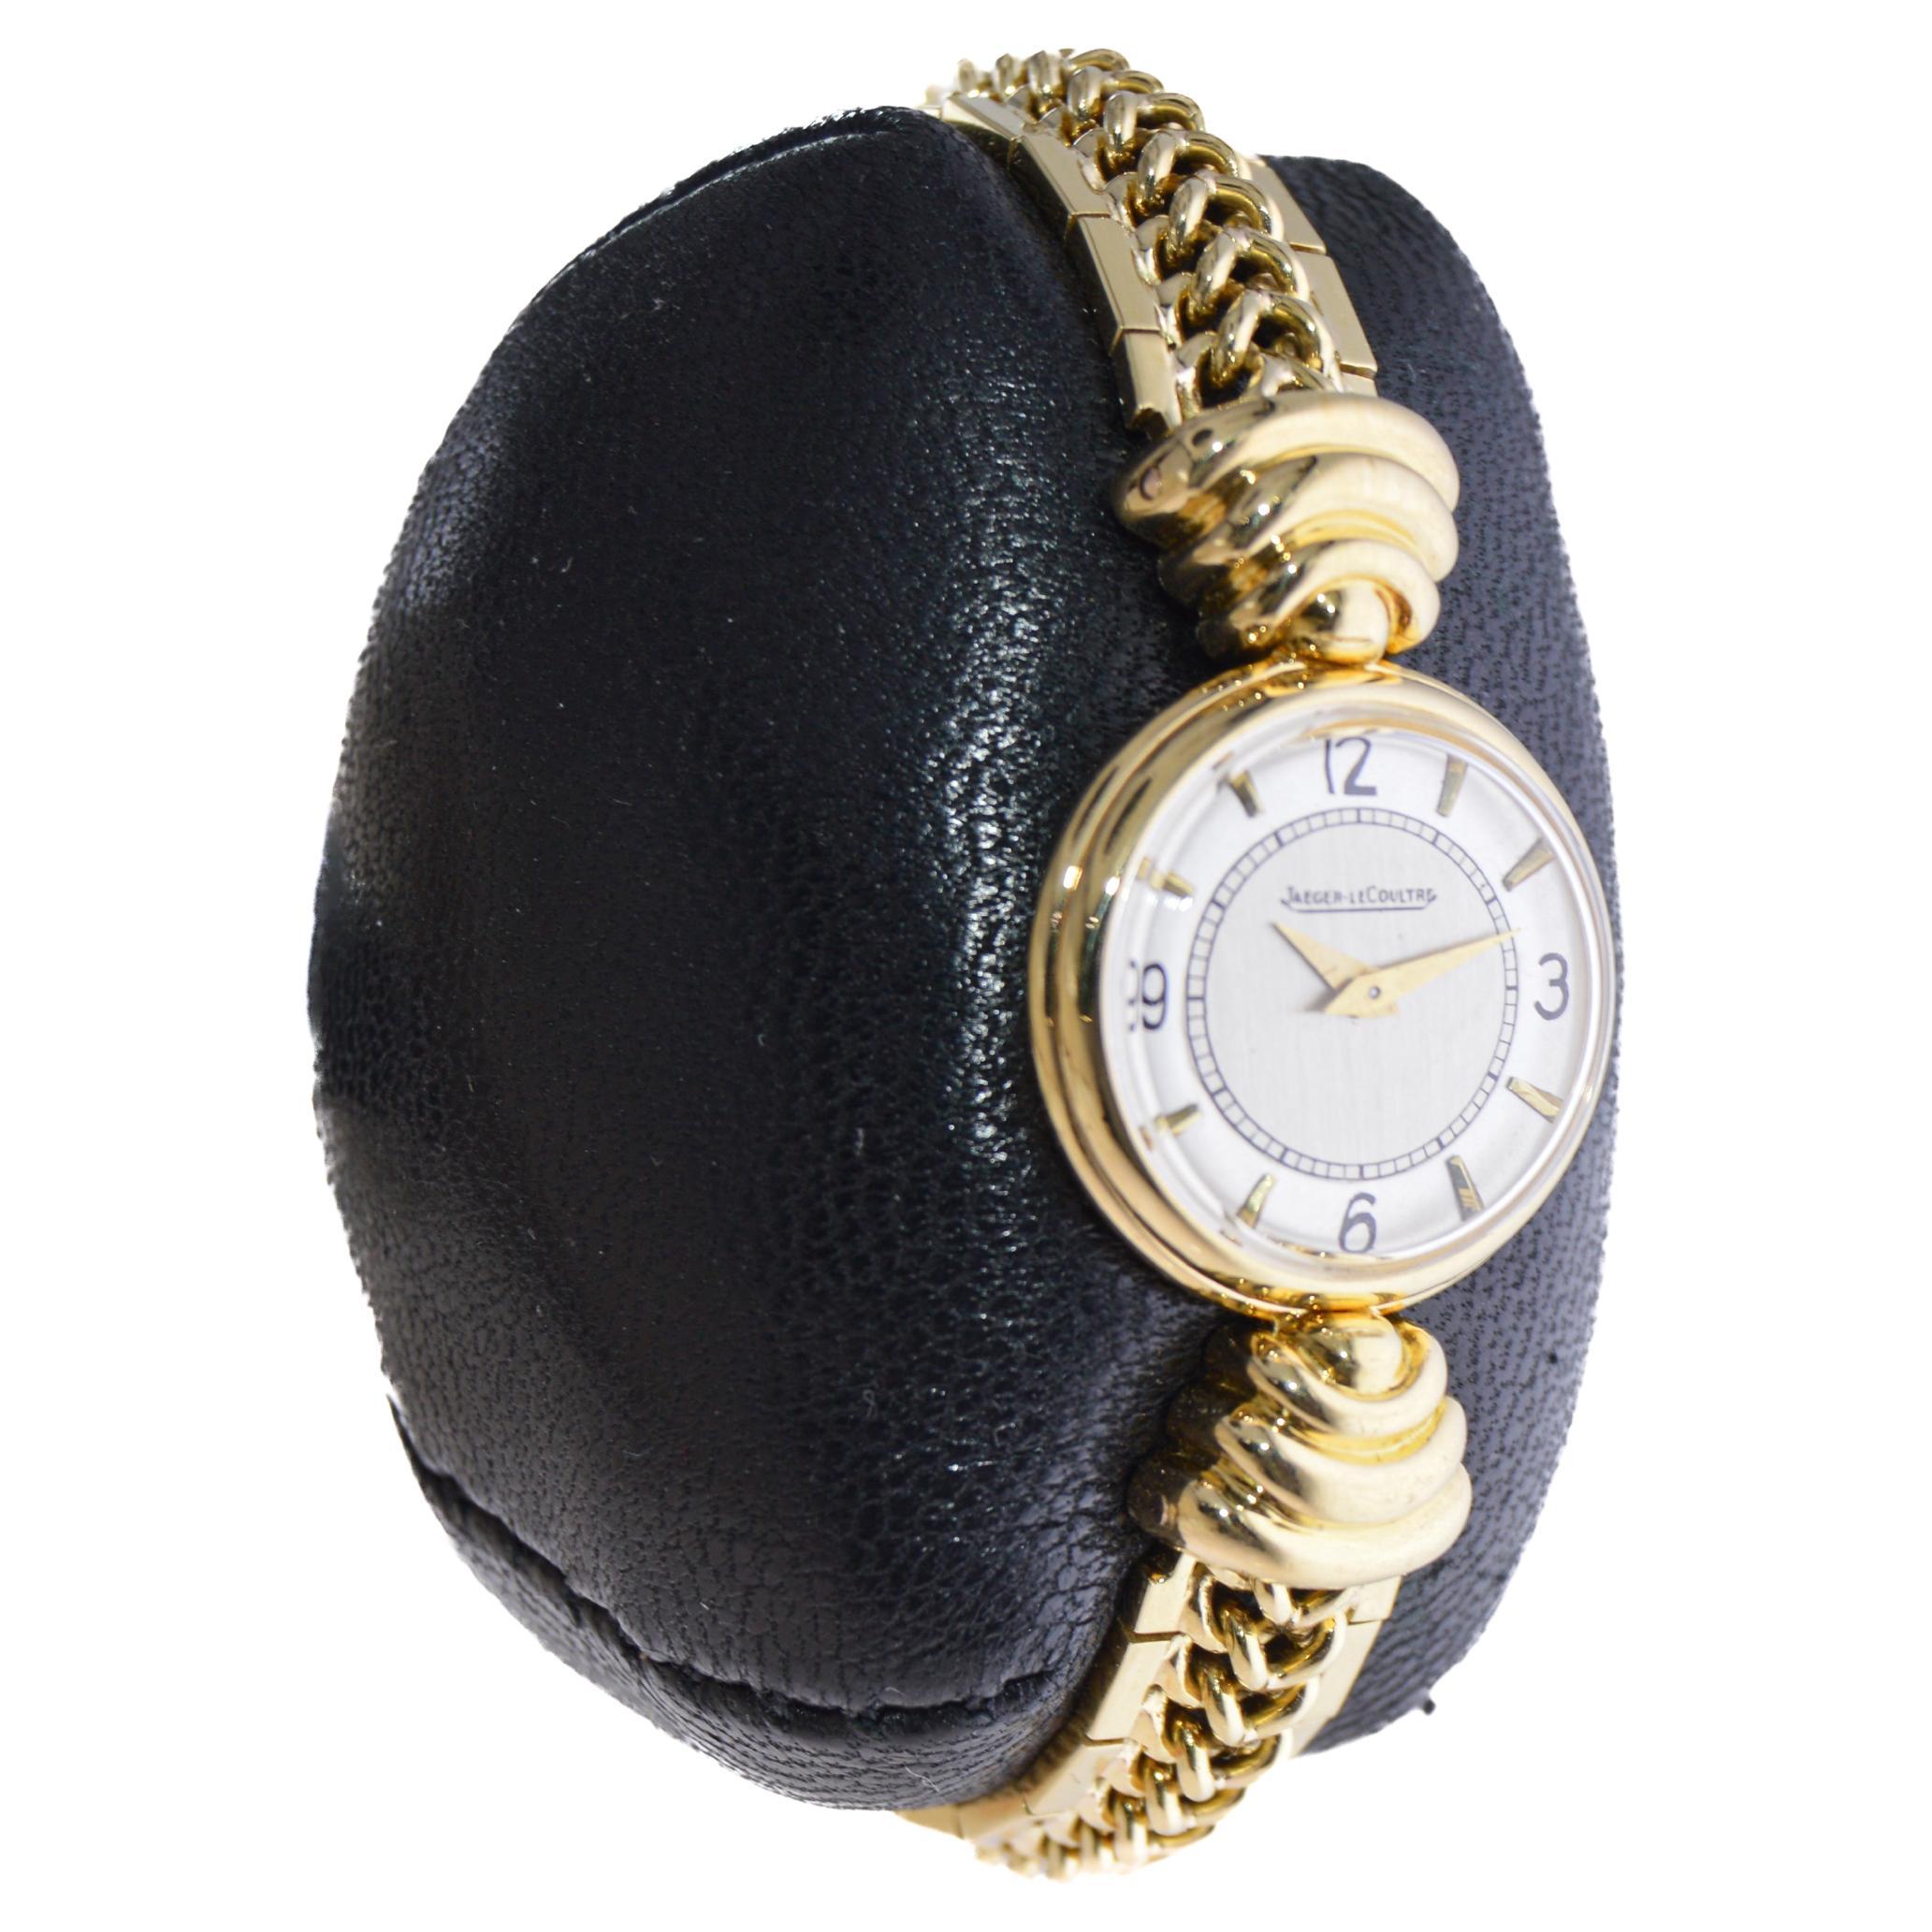 FACTORY / HOUSE: Jaeger-LeCoultre
STYLE / REFERENCE: Ladies Dress Bracelet Watch
METAL / MATERIAL: 18Kt. Solid Yellow Gold 
CIRCA / YEAR: 1940's
DIMENSIONS / SIZE: 37mm Length X 21mm Diameter
MOVEMENT / CALIBER: Manual Winding / 17 Jewels / Caliber